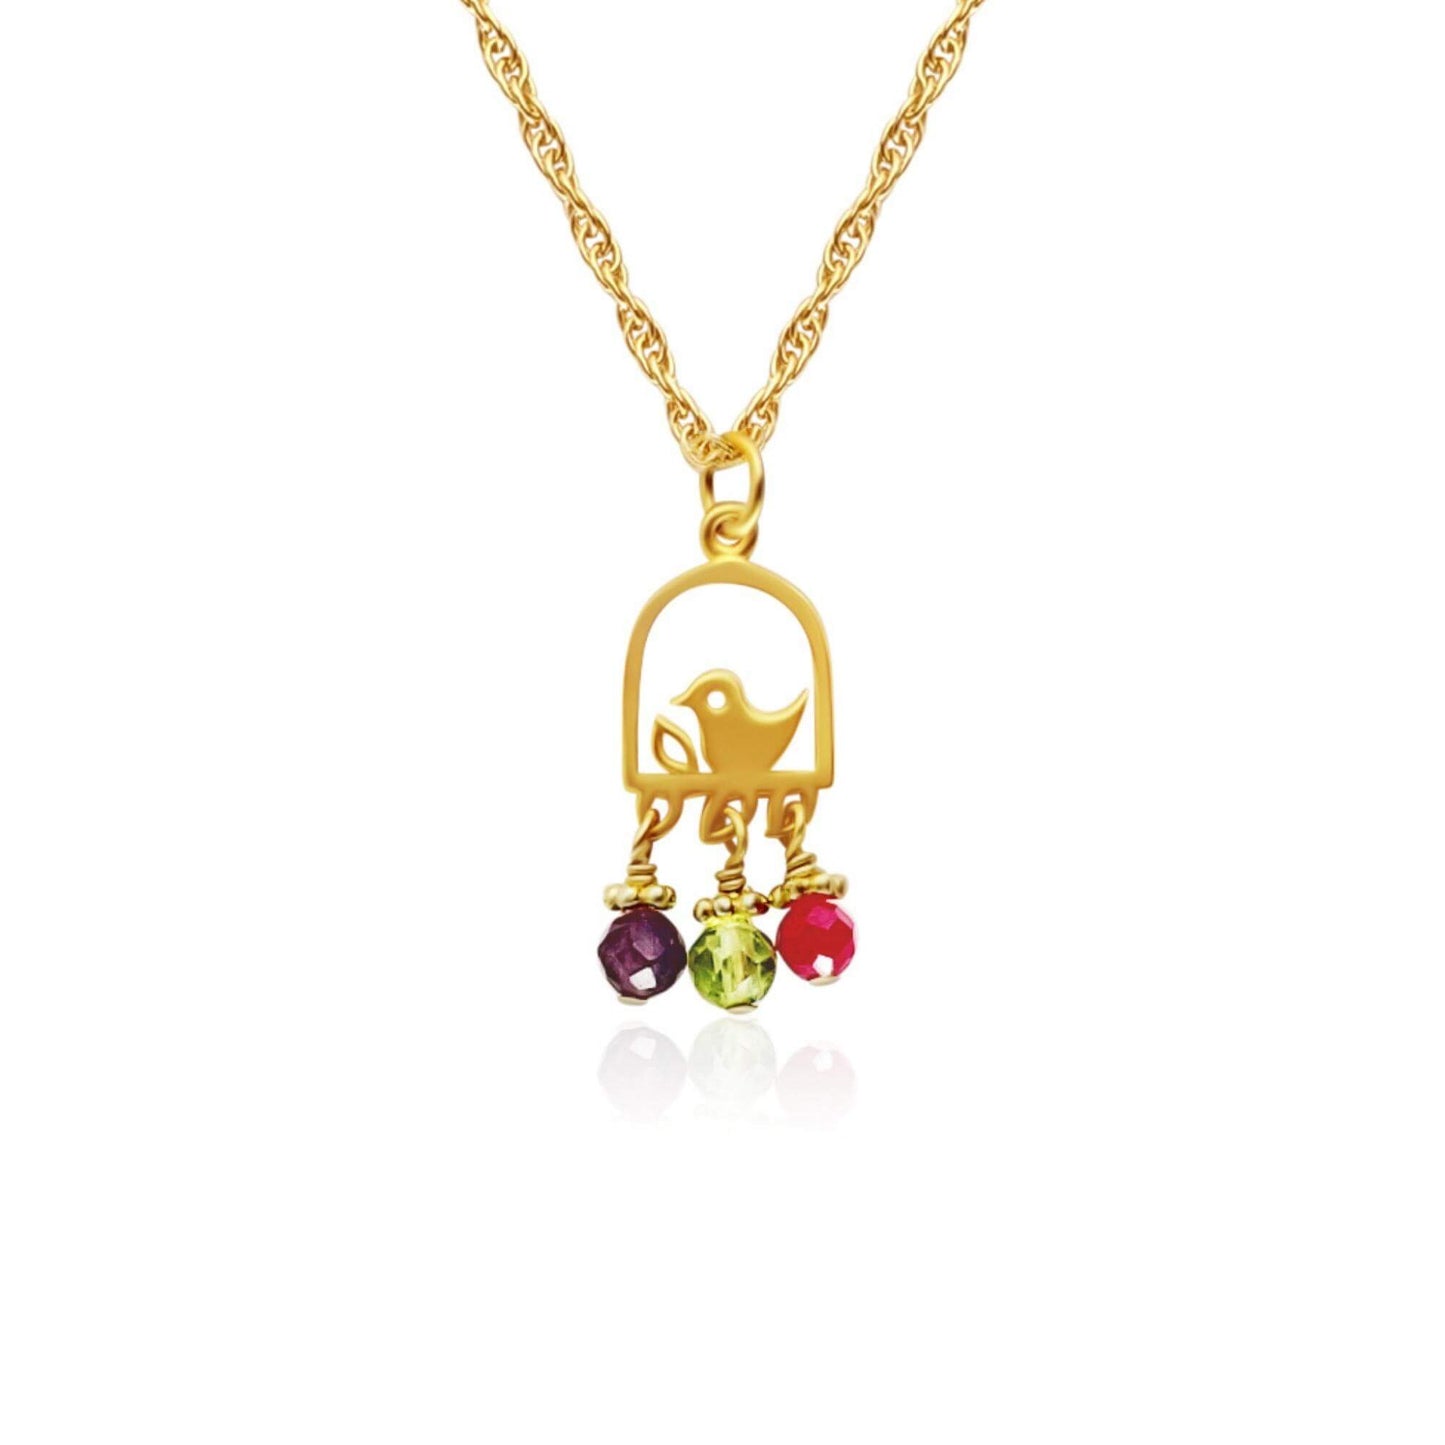 The Best Nest - Mama Bird Charm Necklace in Gold